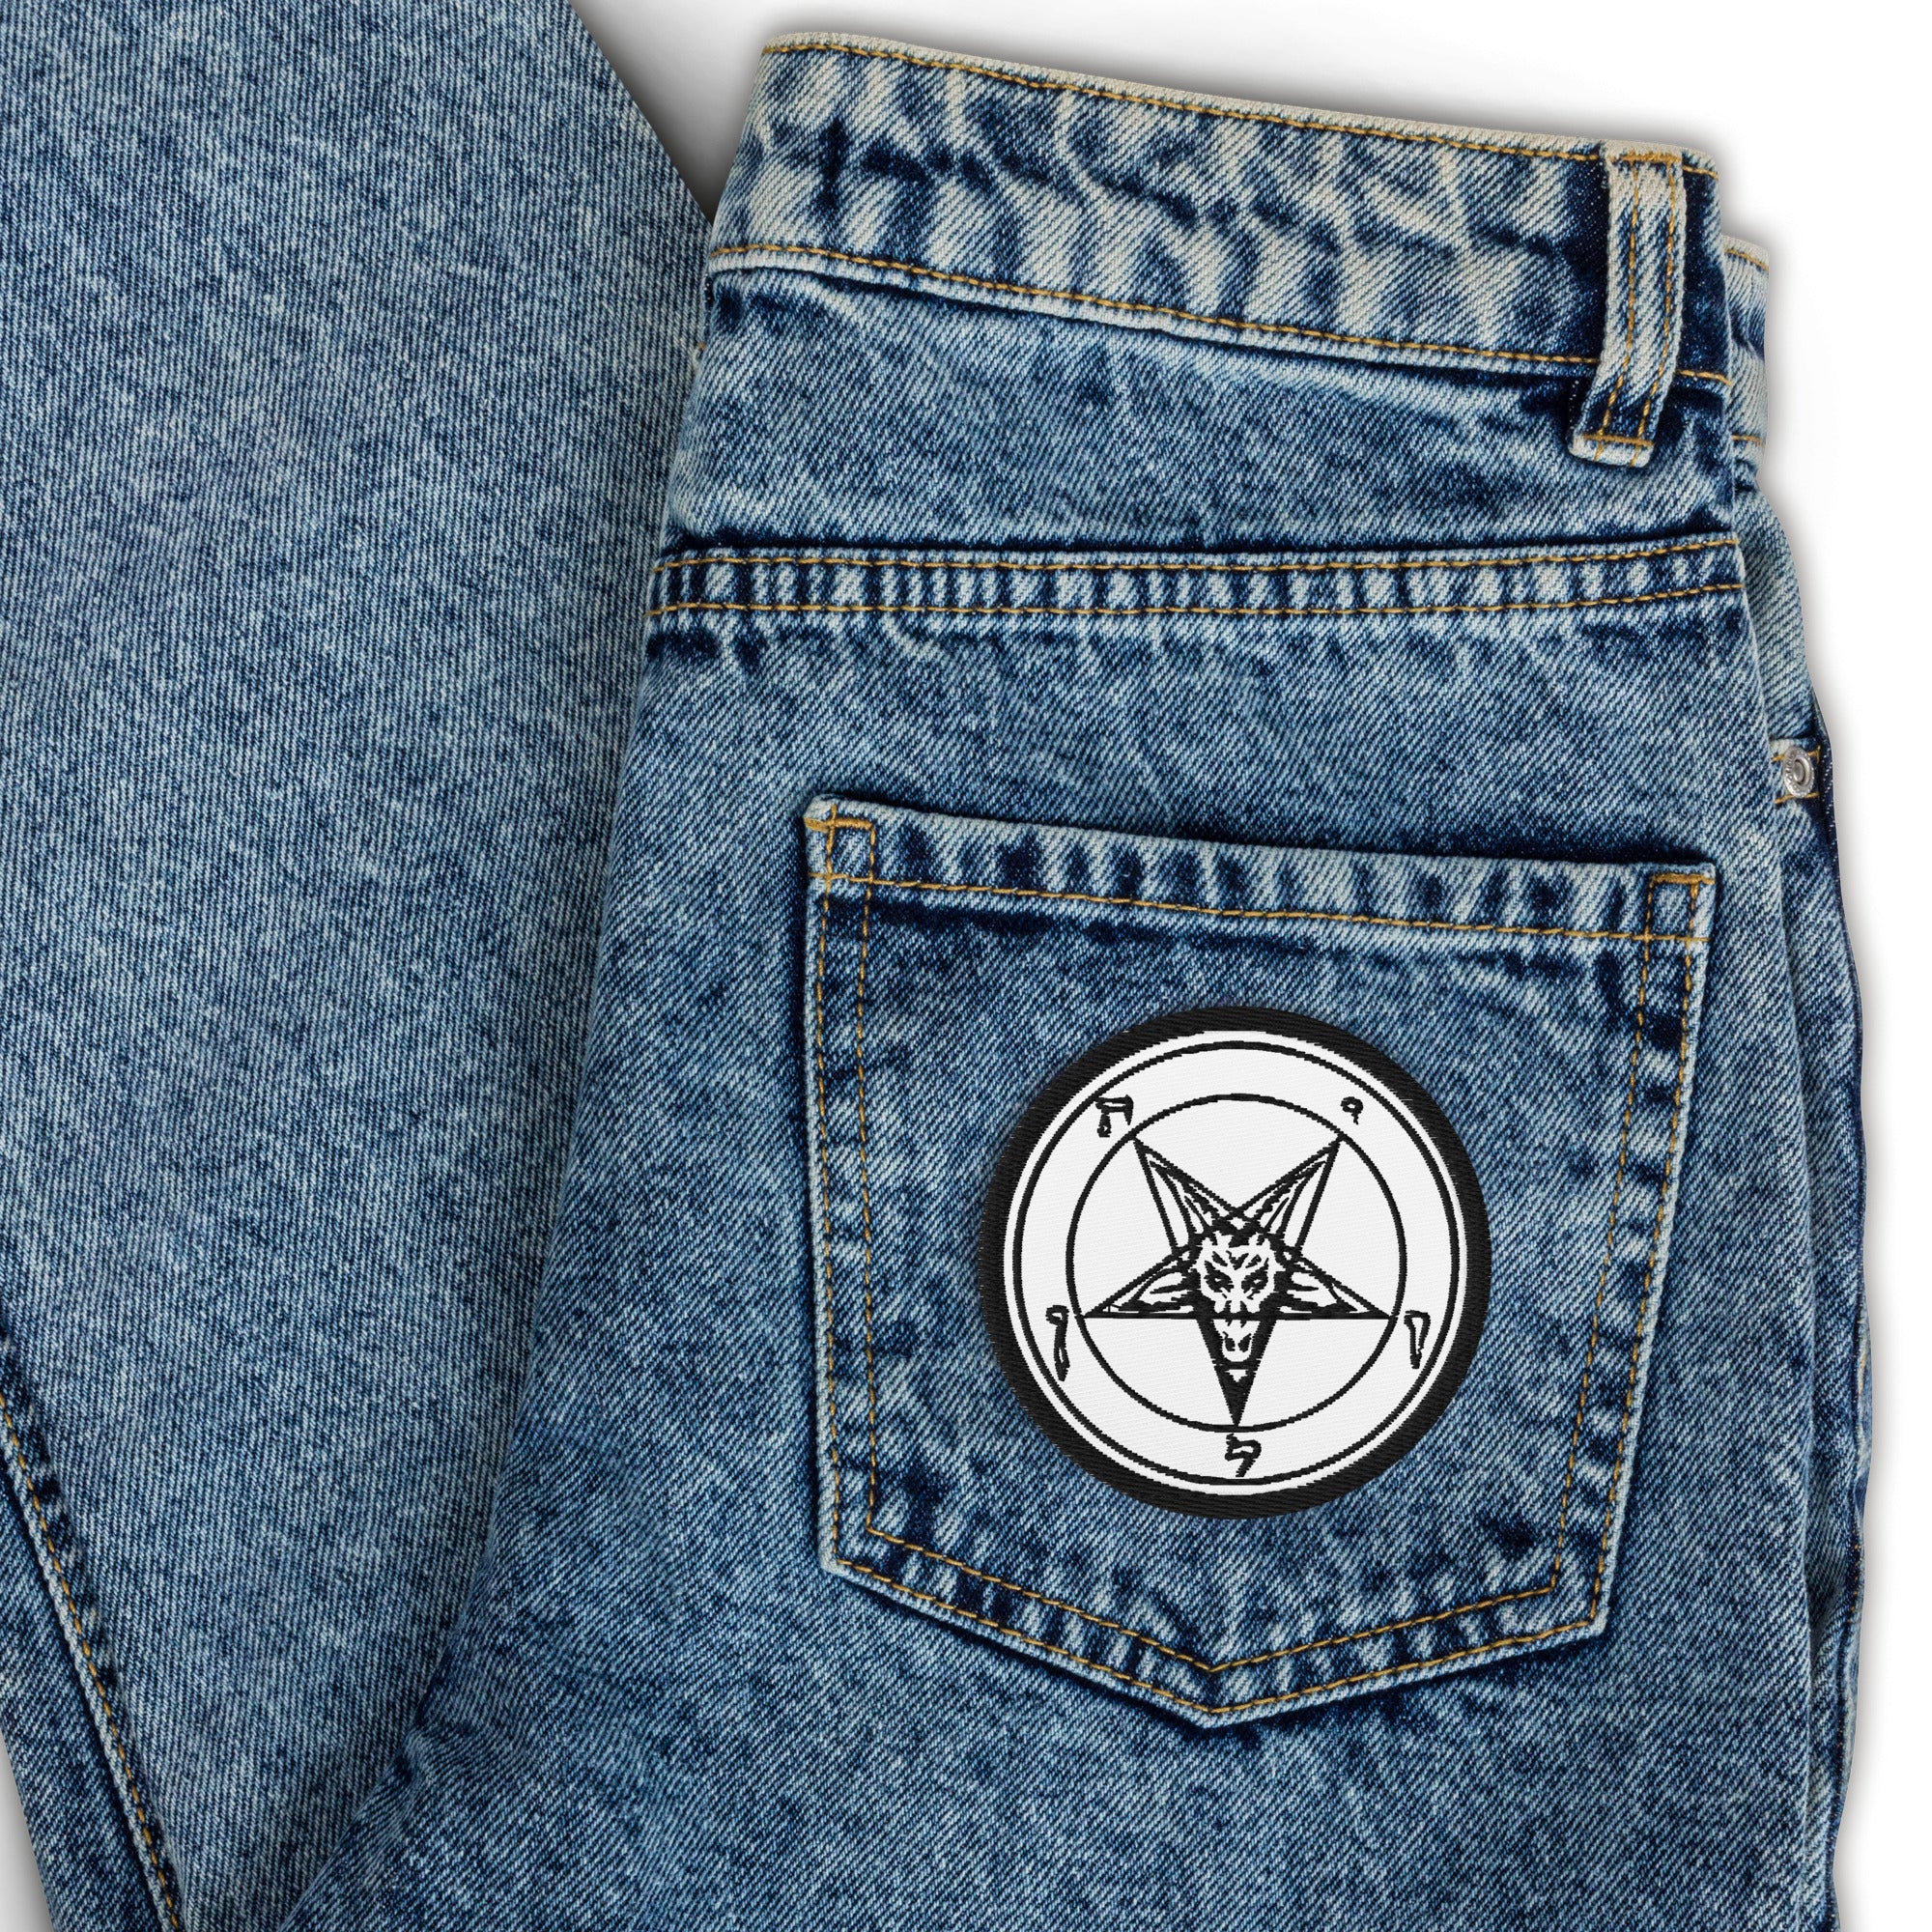 Black Sigil of Baphomet Occult Symbol Embroidered Patch - Edge of Life Designs